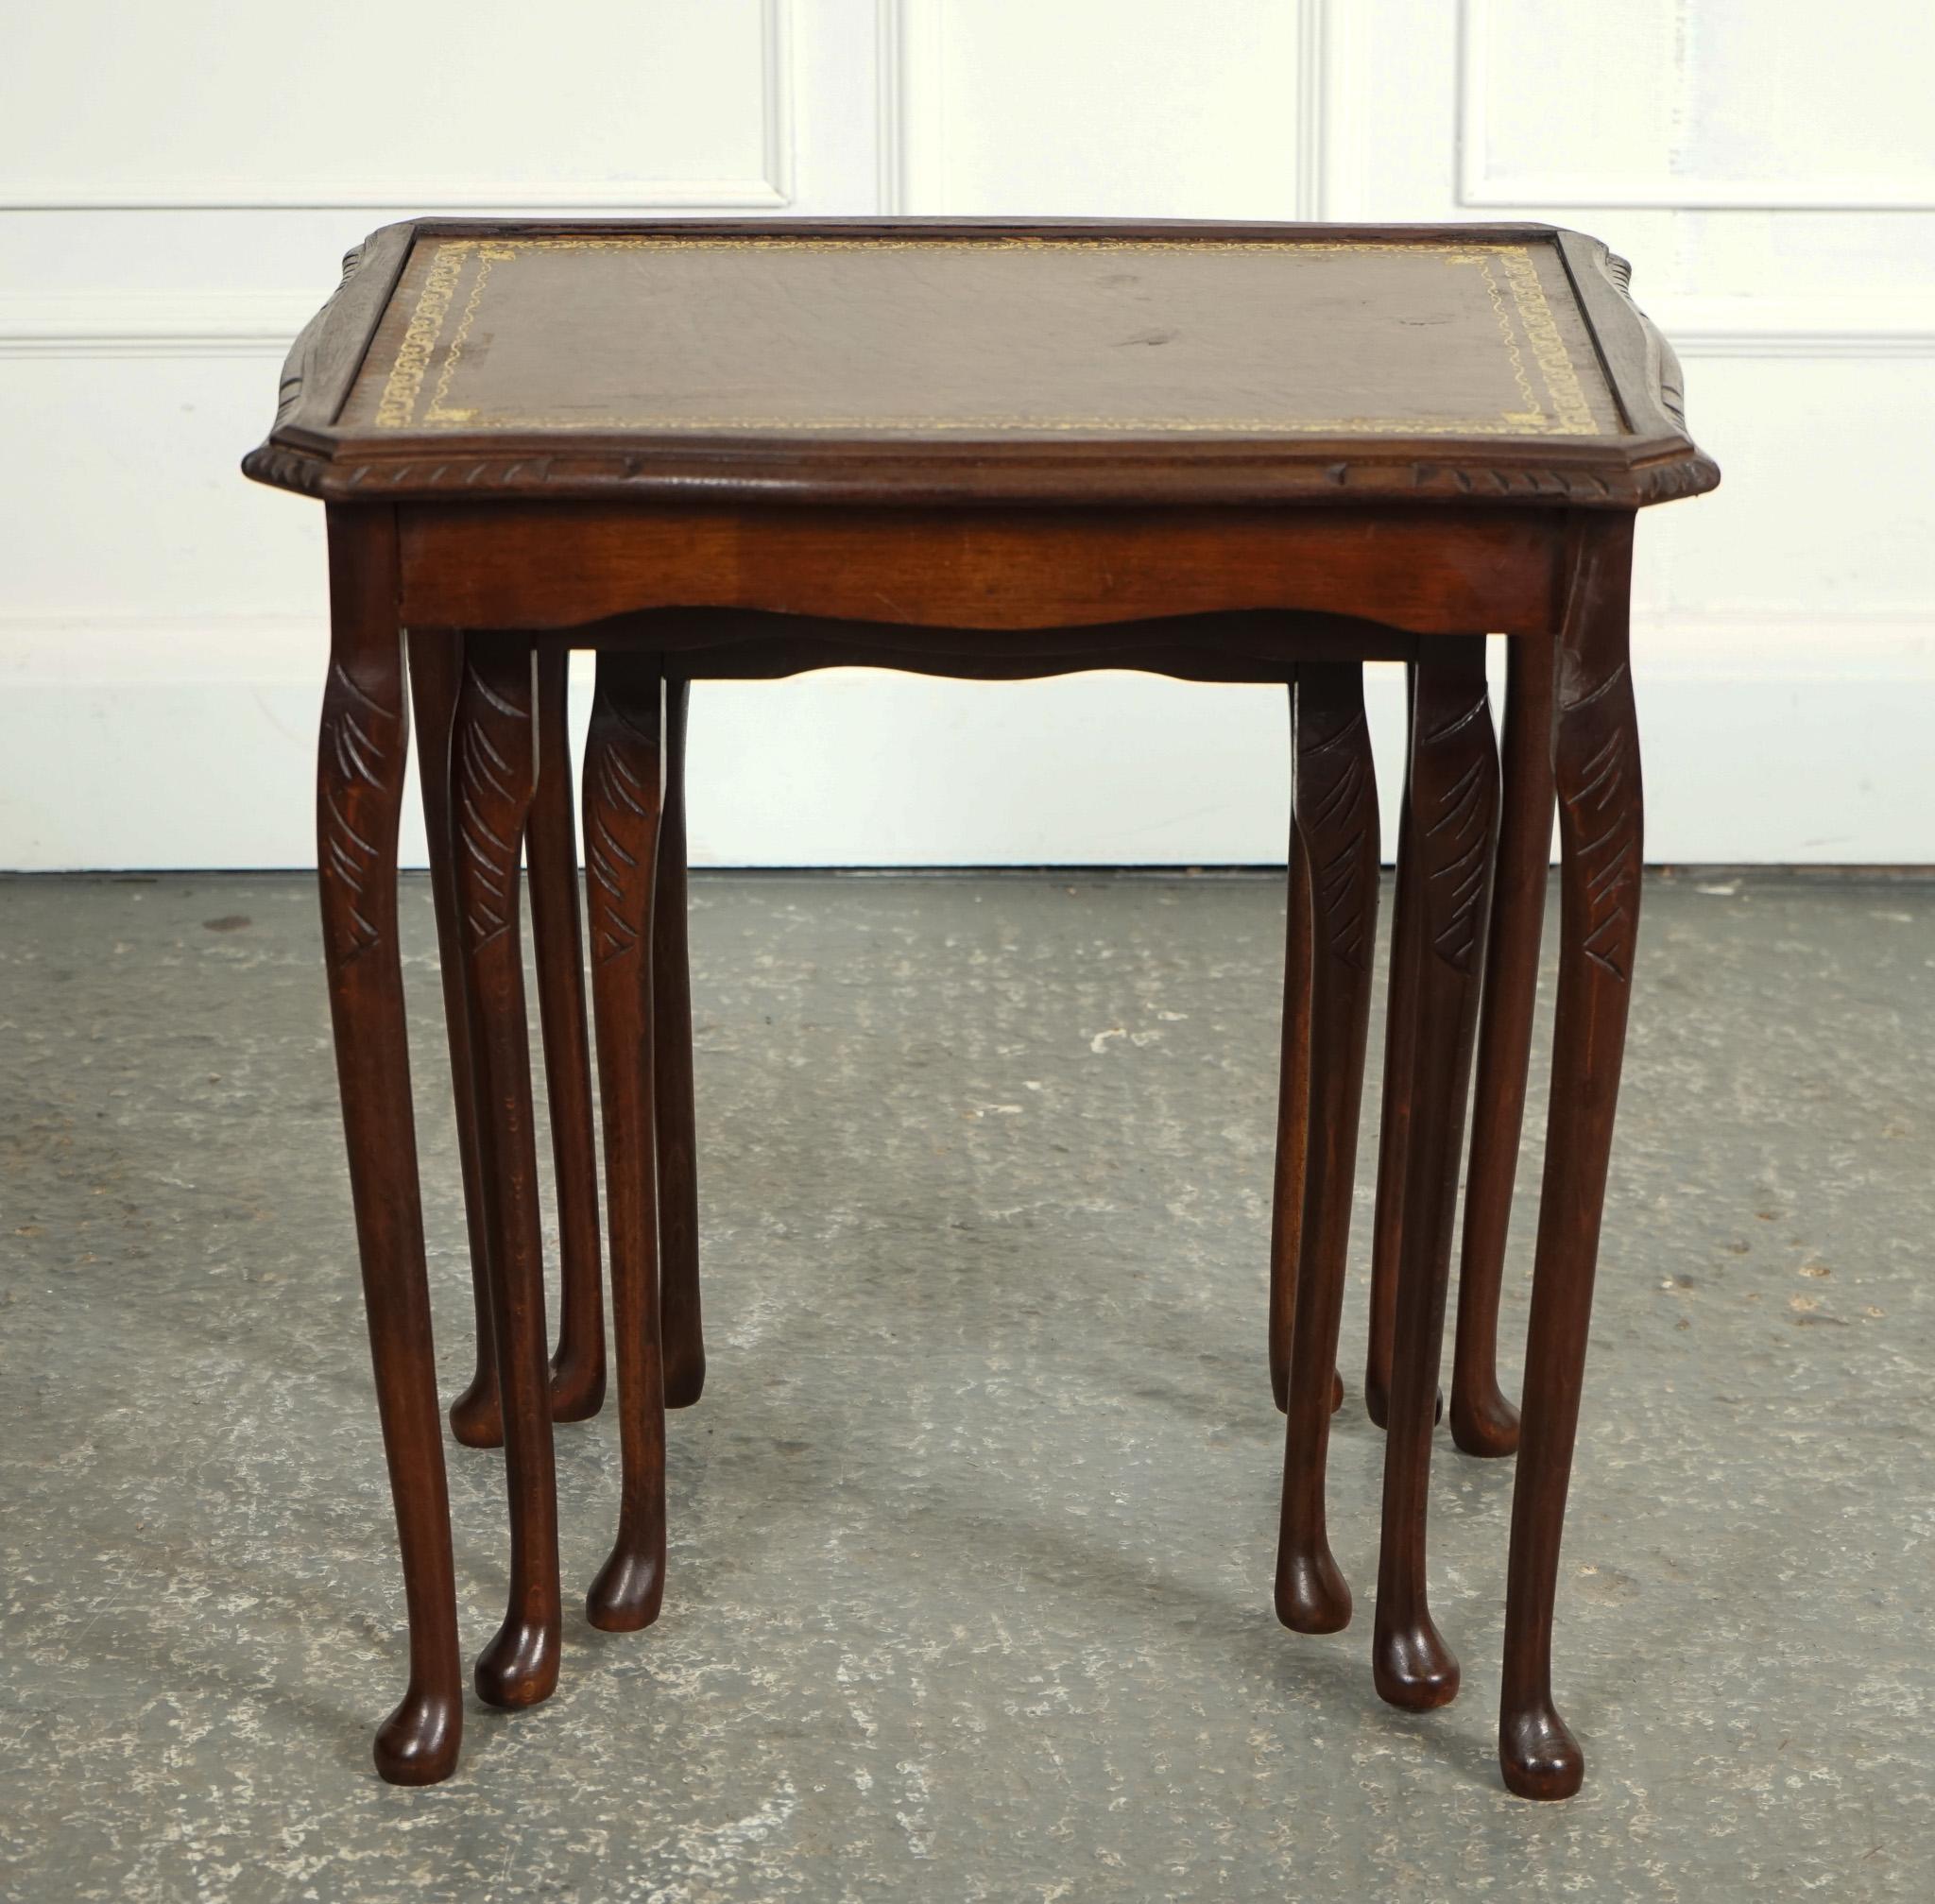 20th Century VINTAGE NEST OF TABLES QUEEN ANNE STYLE LEGS WiTH BROWN EMBOSSED LEATHER TOP For Sale